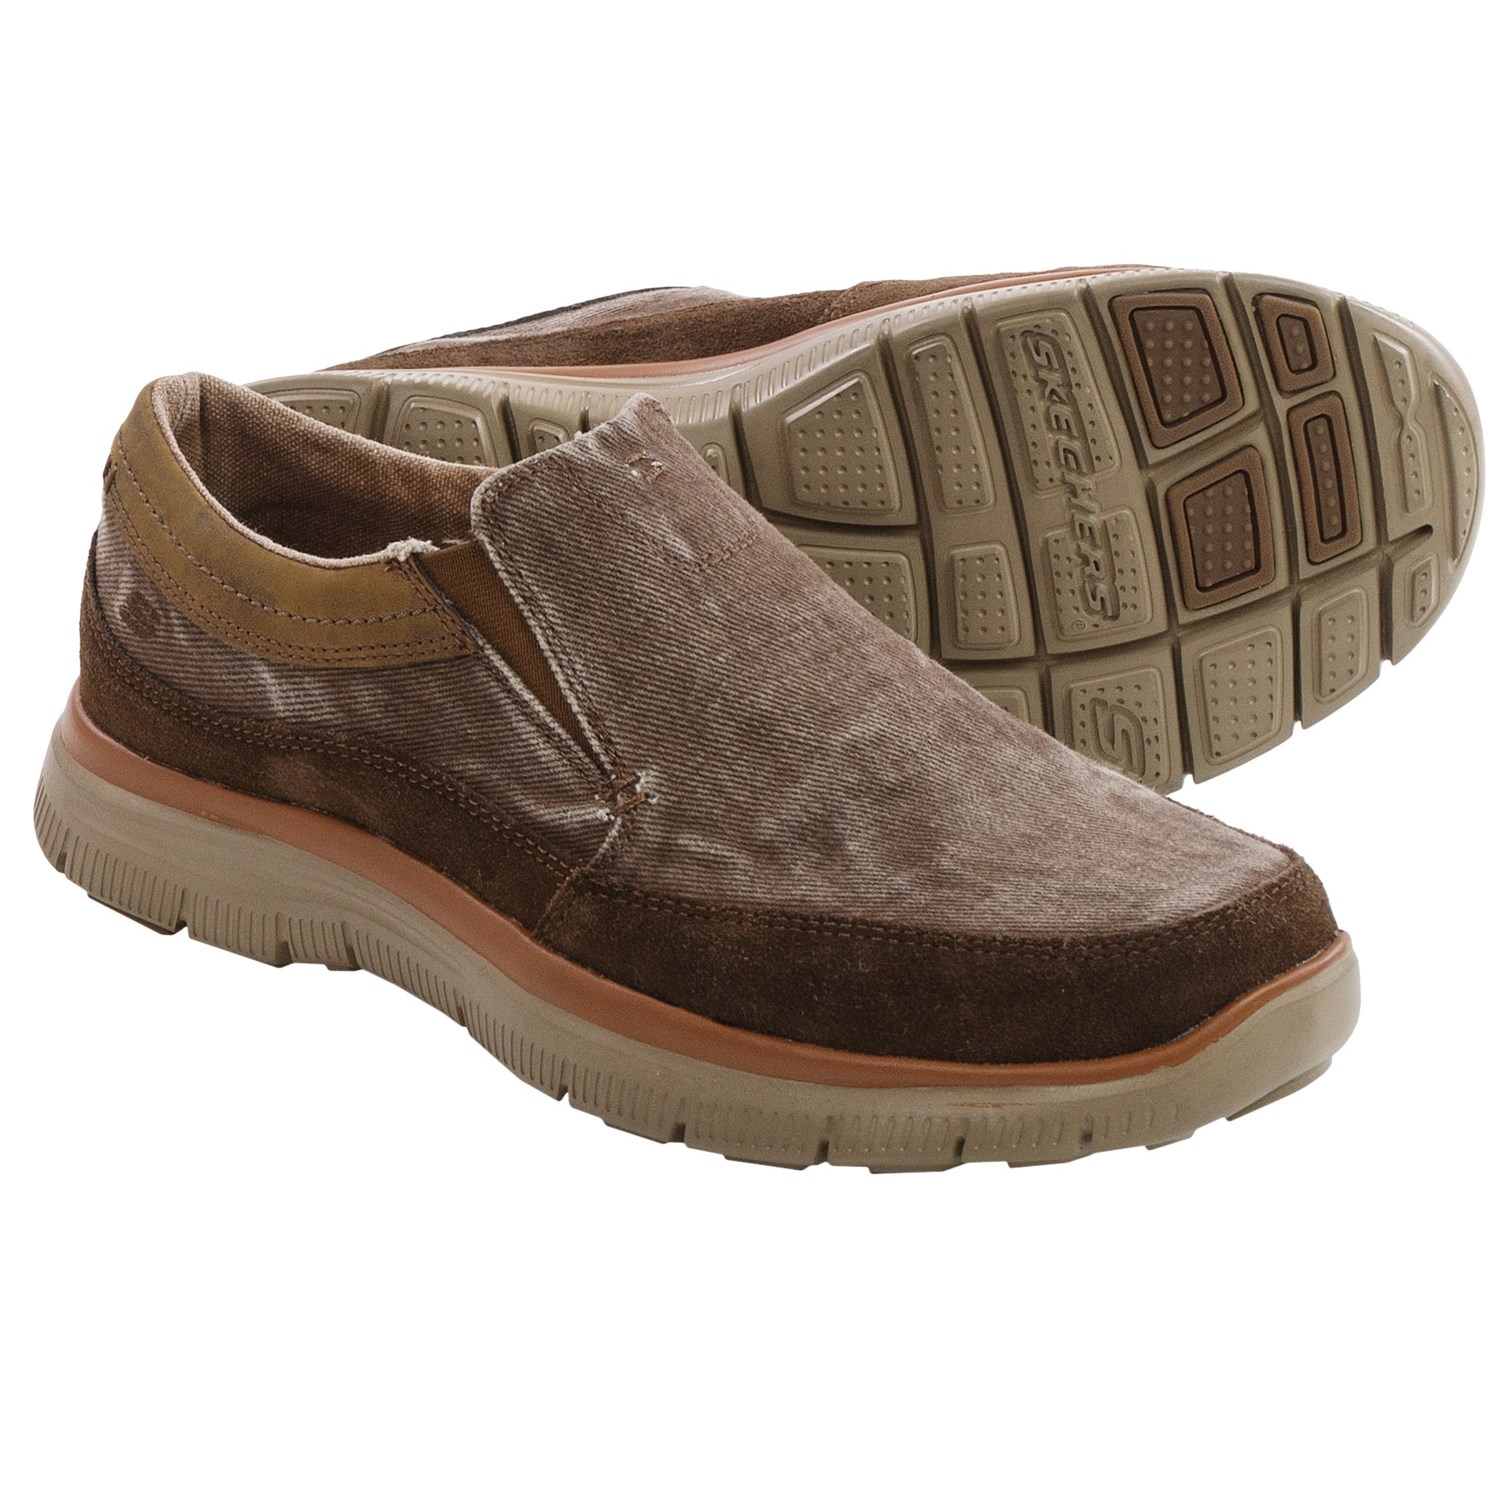 Skechers Hinton Olmos Shoes - Relaxed Fit (For Men) in Cocoa